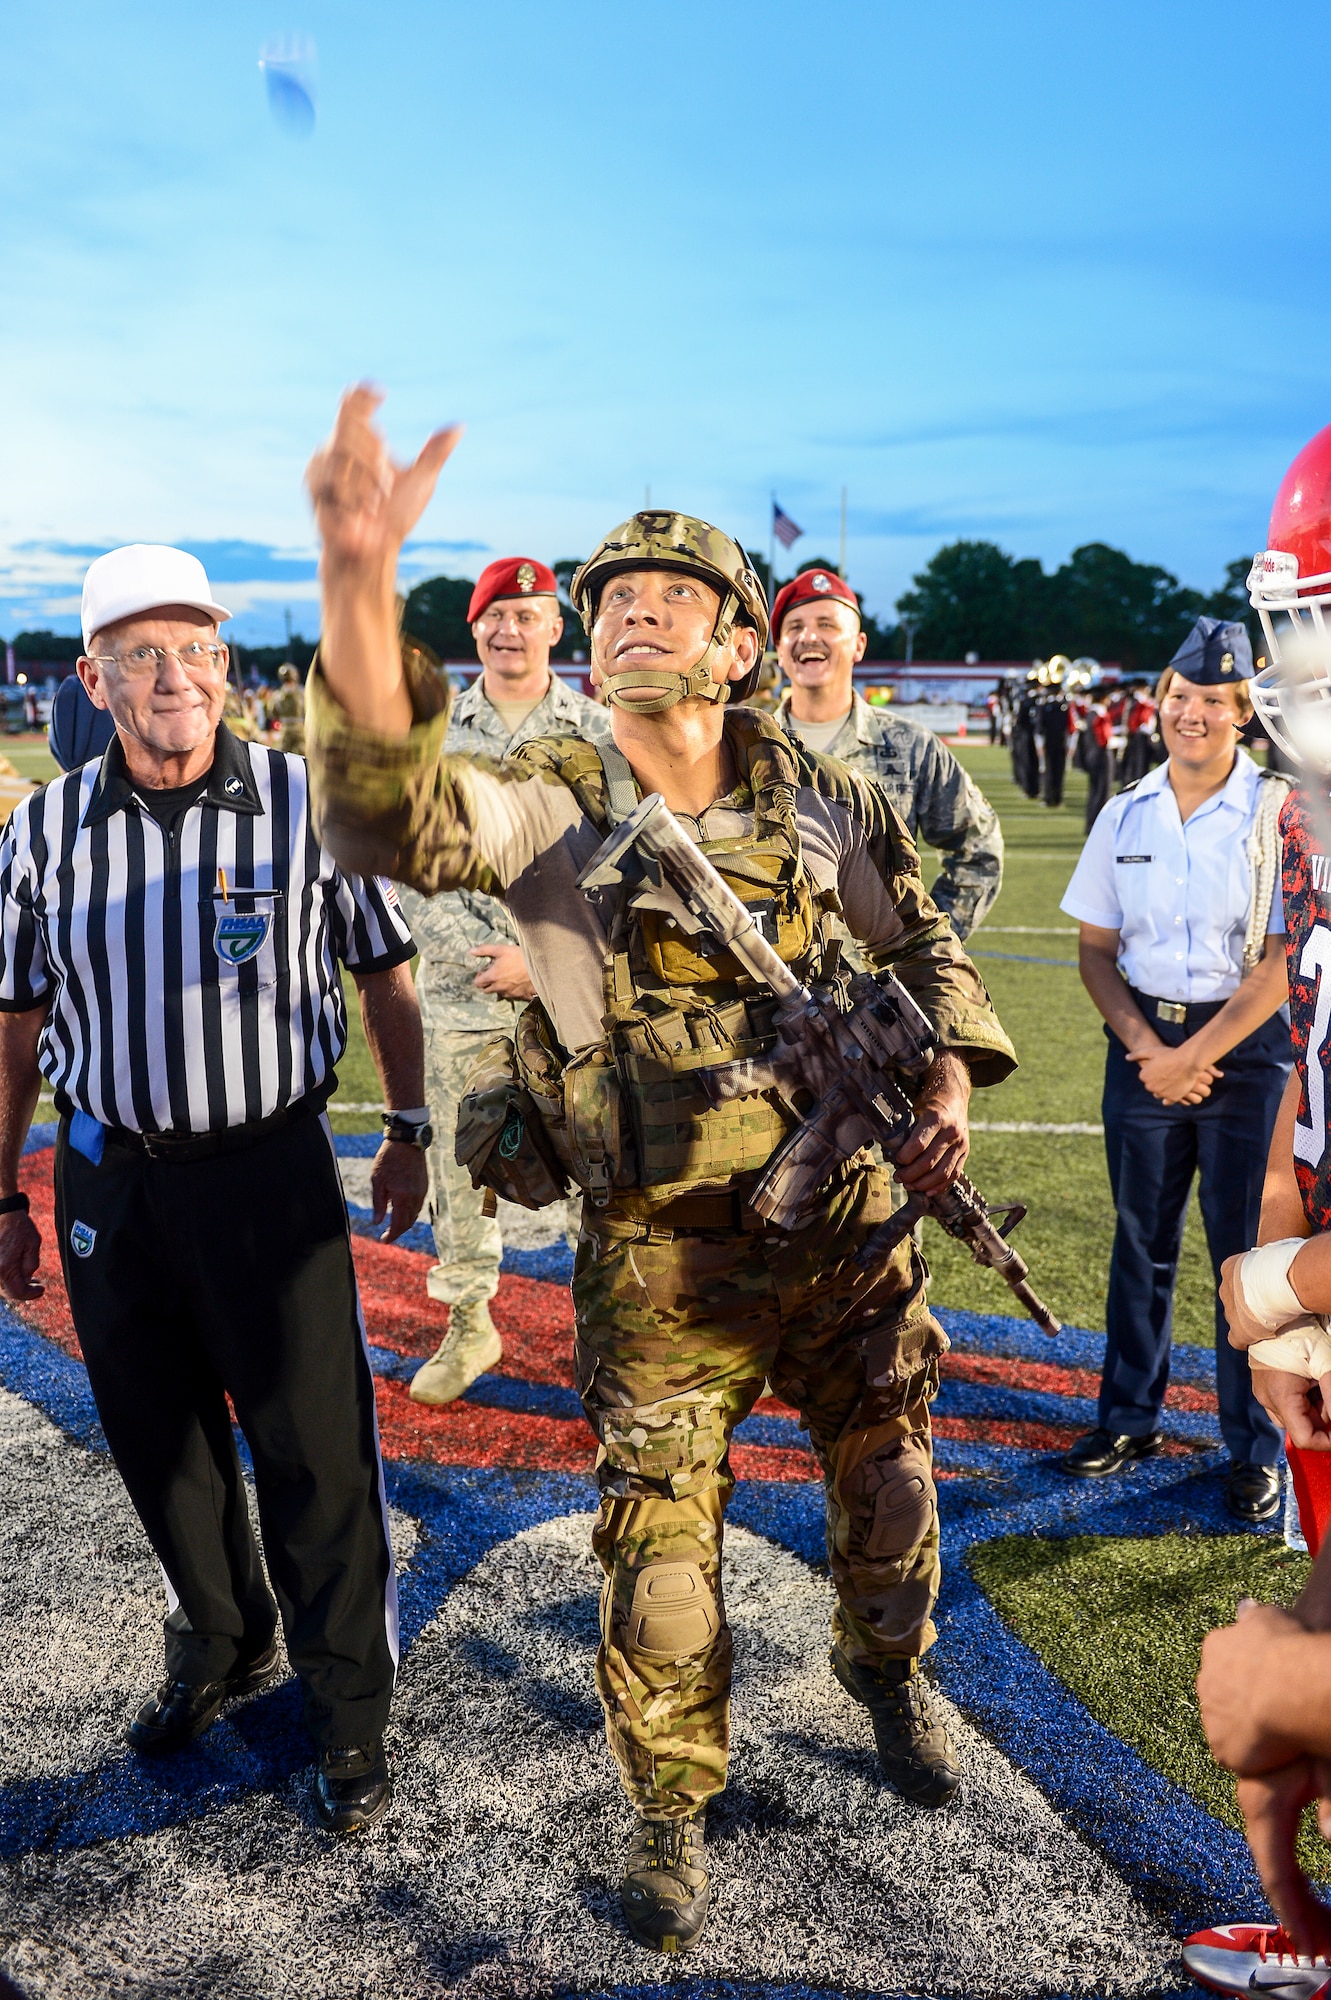 Tech. Sgt Ismael Villegas, 24th Special Operations Wing, Special Tactics Training Squadron special tactics member, flips the game coin at Fort Walton Beach High School, Fort Walton Beach, Fla., Sept. 12, 2014. F W B High School hosted a military appreciation night, to pay tribute to their local servicemen and women.  (U.S. Air Force photo/Airman 1st Class Jeff Parkinson)